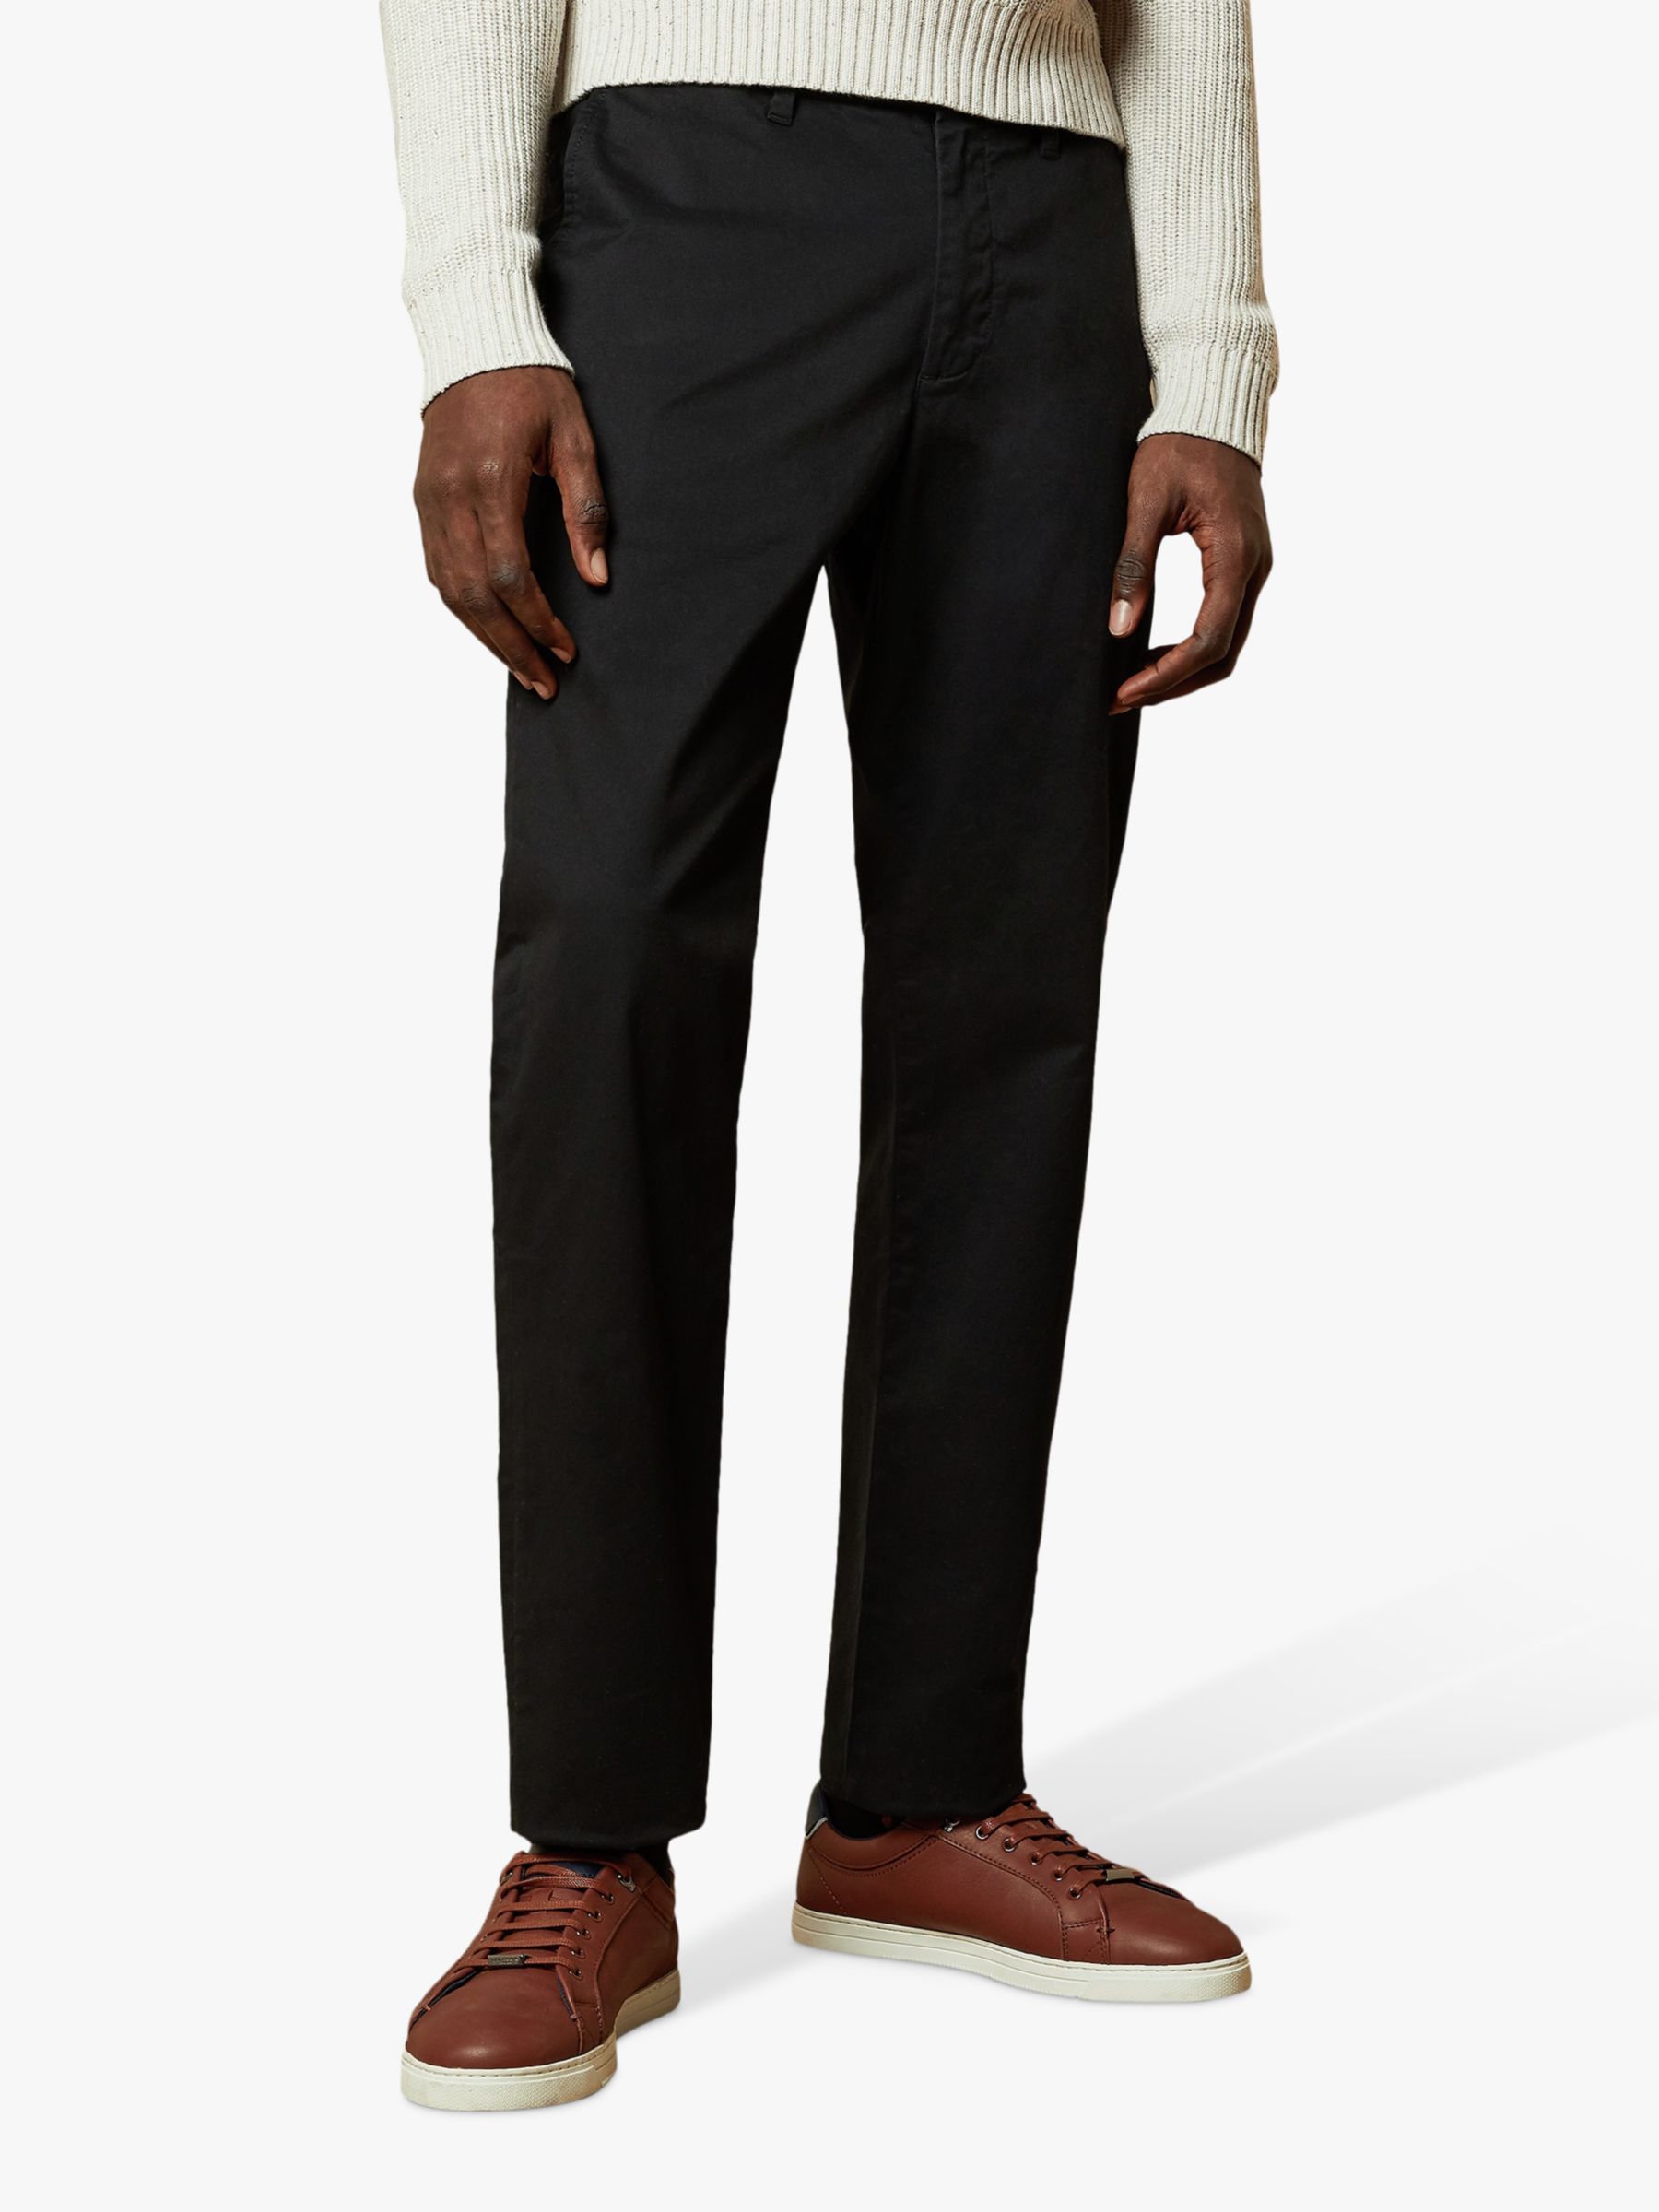 Ted Baker Clncere Classic Fit Chinos, Black at John Lewis & Partners